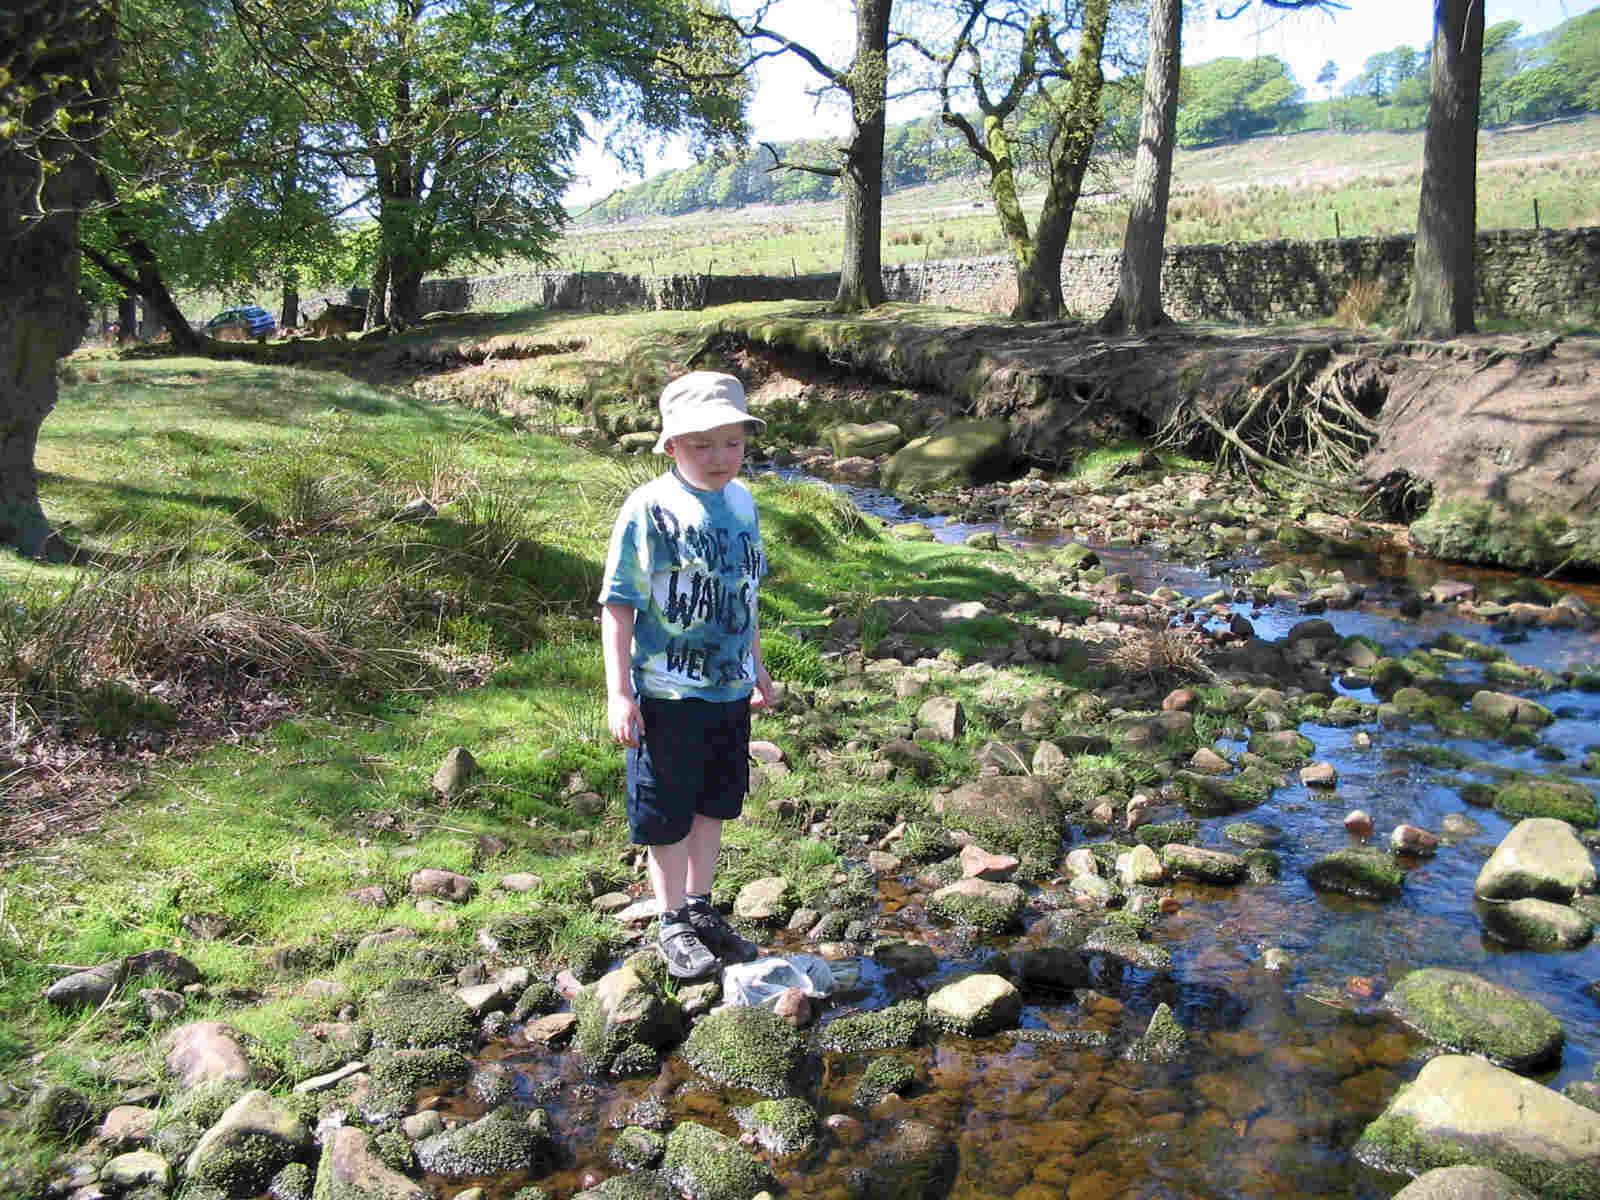 Liam in the Trough of Bowland